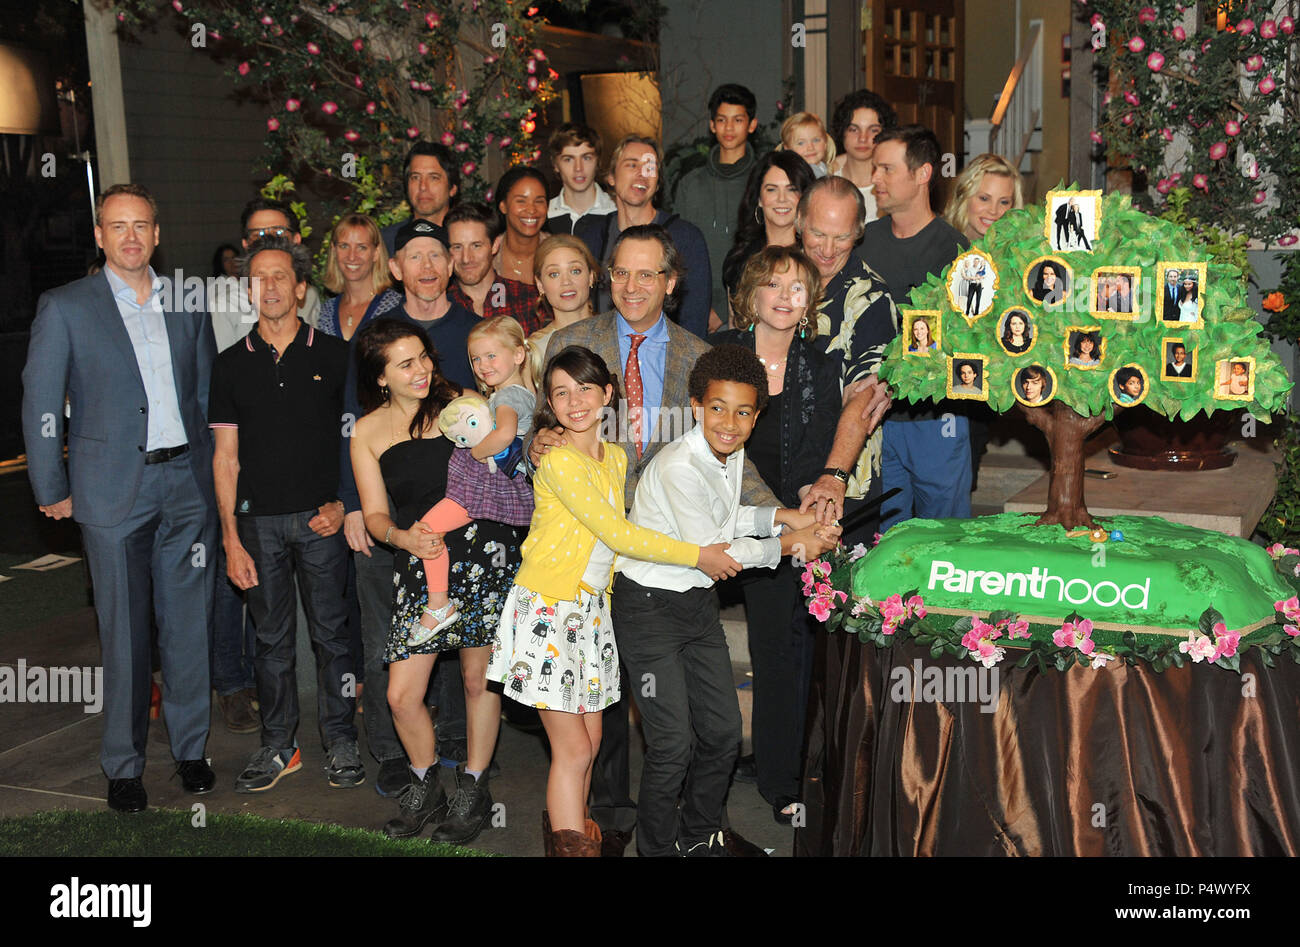 Max Burkholder, Ray Romano, Miles Heizer, Joy Bryant, Tyree Brown, Craig T. Nelson, Bonnie Bedelia, Lauren Graham, Peter Krause, Monica Potter, Sam Jaeger, Erika Christensen,  Savannah Paige Rae,   at ParentHood 100th Episode at the Universal Lot Stage 43 on Nov. 7, 2014 in Los Angeles.Max Burkholder, Ray Romano, Miles Heizer, Joy Bryant, Tyree Brown, Craig T. Nelson, Bonnie Bedelia, Lauren Graham, Peter Krause, Monica Potter, Sam Jaeger, Erika Christensen,  Savannah Paige Rae, 163  Event in Hollywood Life - California, Red Carpet Event, USA, Film Industry, Celebrities, Photography, Bestof, Ar Stock Photo